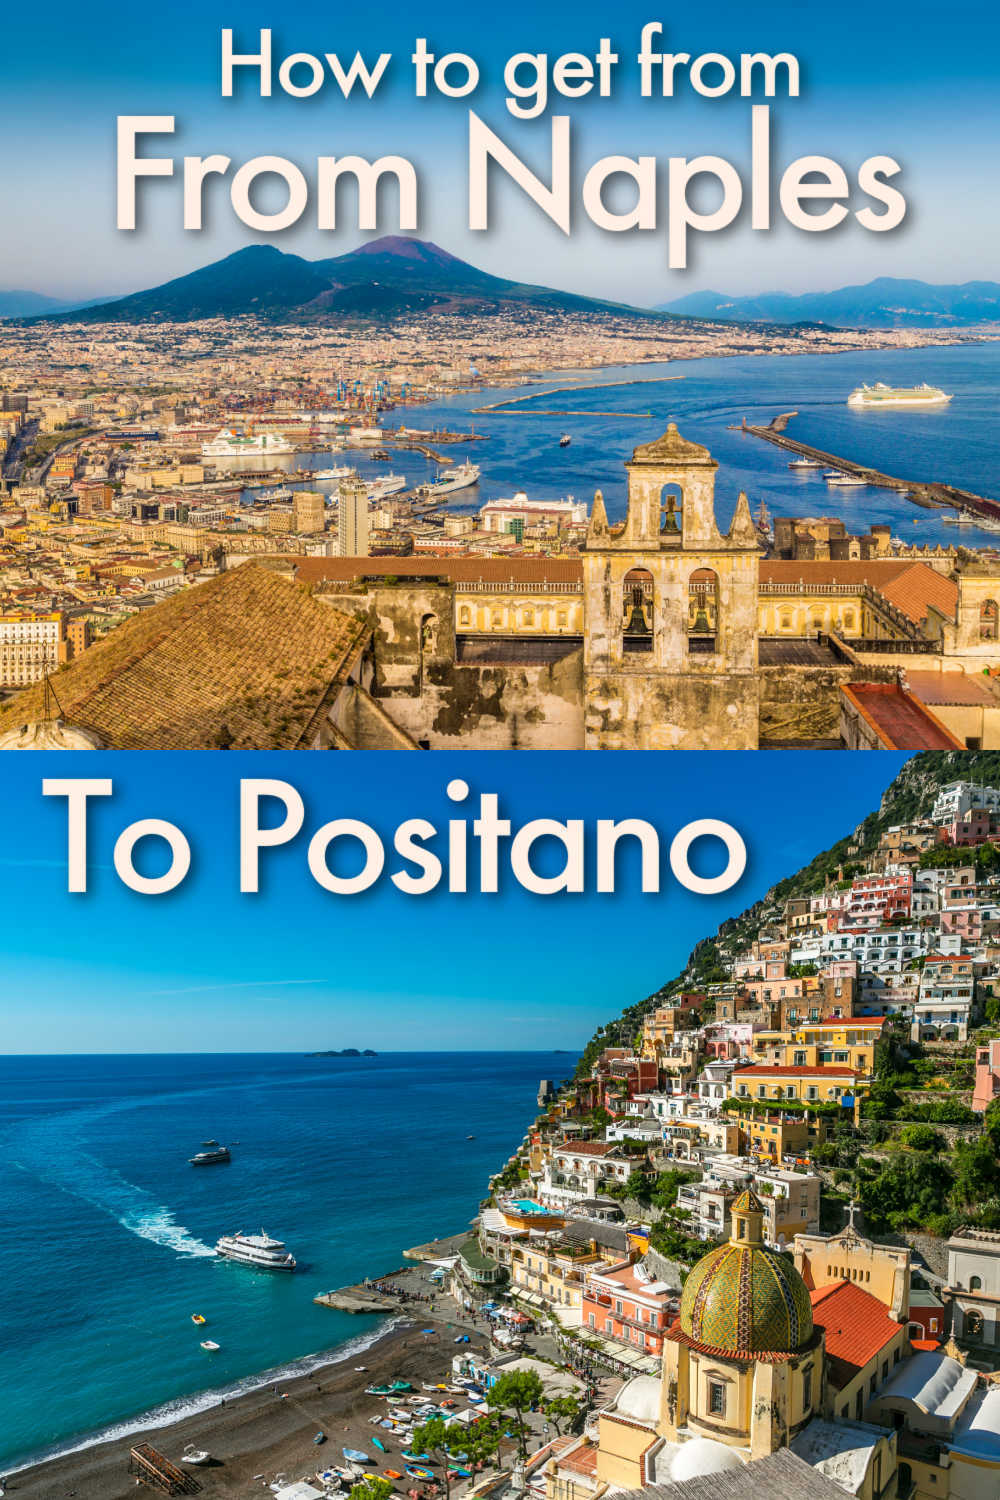 Naples to Positano Guide! Here is everything you need to know about how to get from Naples to Positano by car, ferry, bus and train. We listed all the public transportation available so that you can travel to Positano from Naples easily, comfortably, and quickly. Apart from driving from Naples to Positano, there is no direct way. Naples to Positano ferry, trains, and buses will have a change, so you better read this guide to plan your trip to Amalfi Coast, Italy.